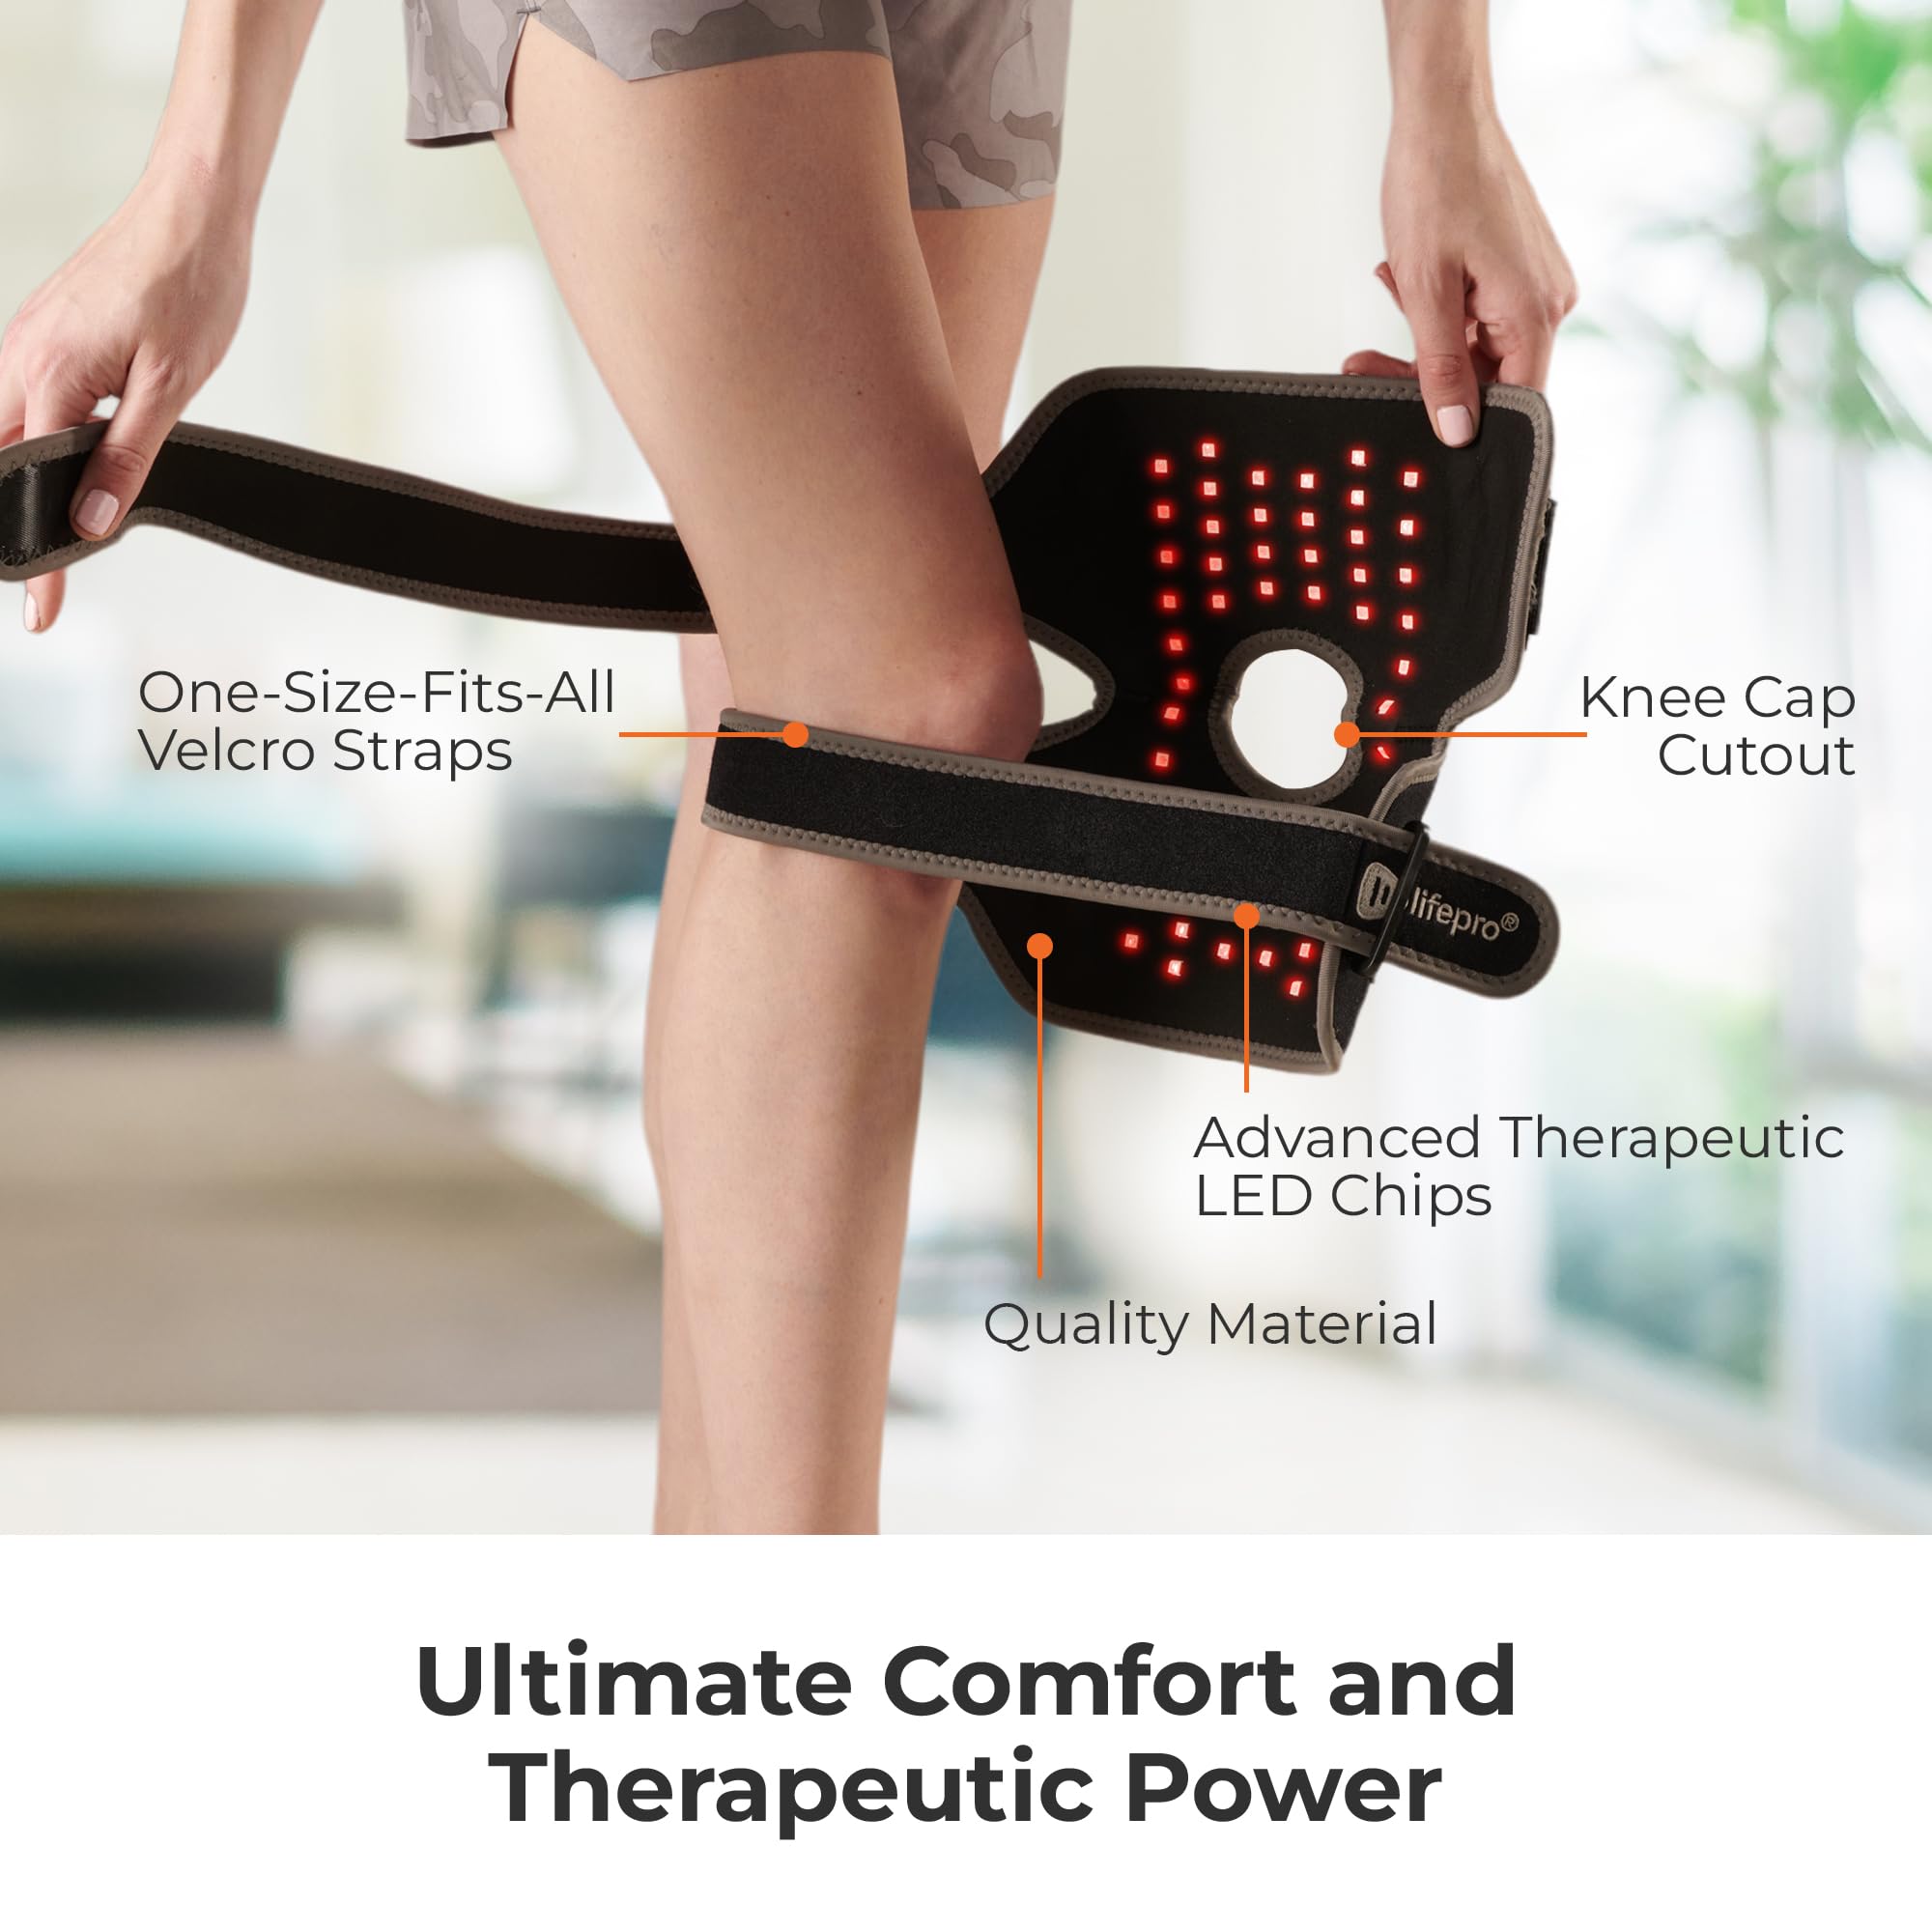 LifePro Vibration & Near Infrared Light Therapy Knee Brace - Red Light Therapy for Knee Device with Vibration for Faster Recovery & Knee Pain Relief- Great for Athletes & Beyond (Gray)